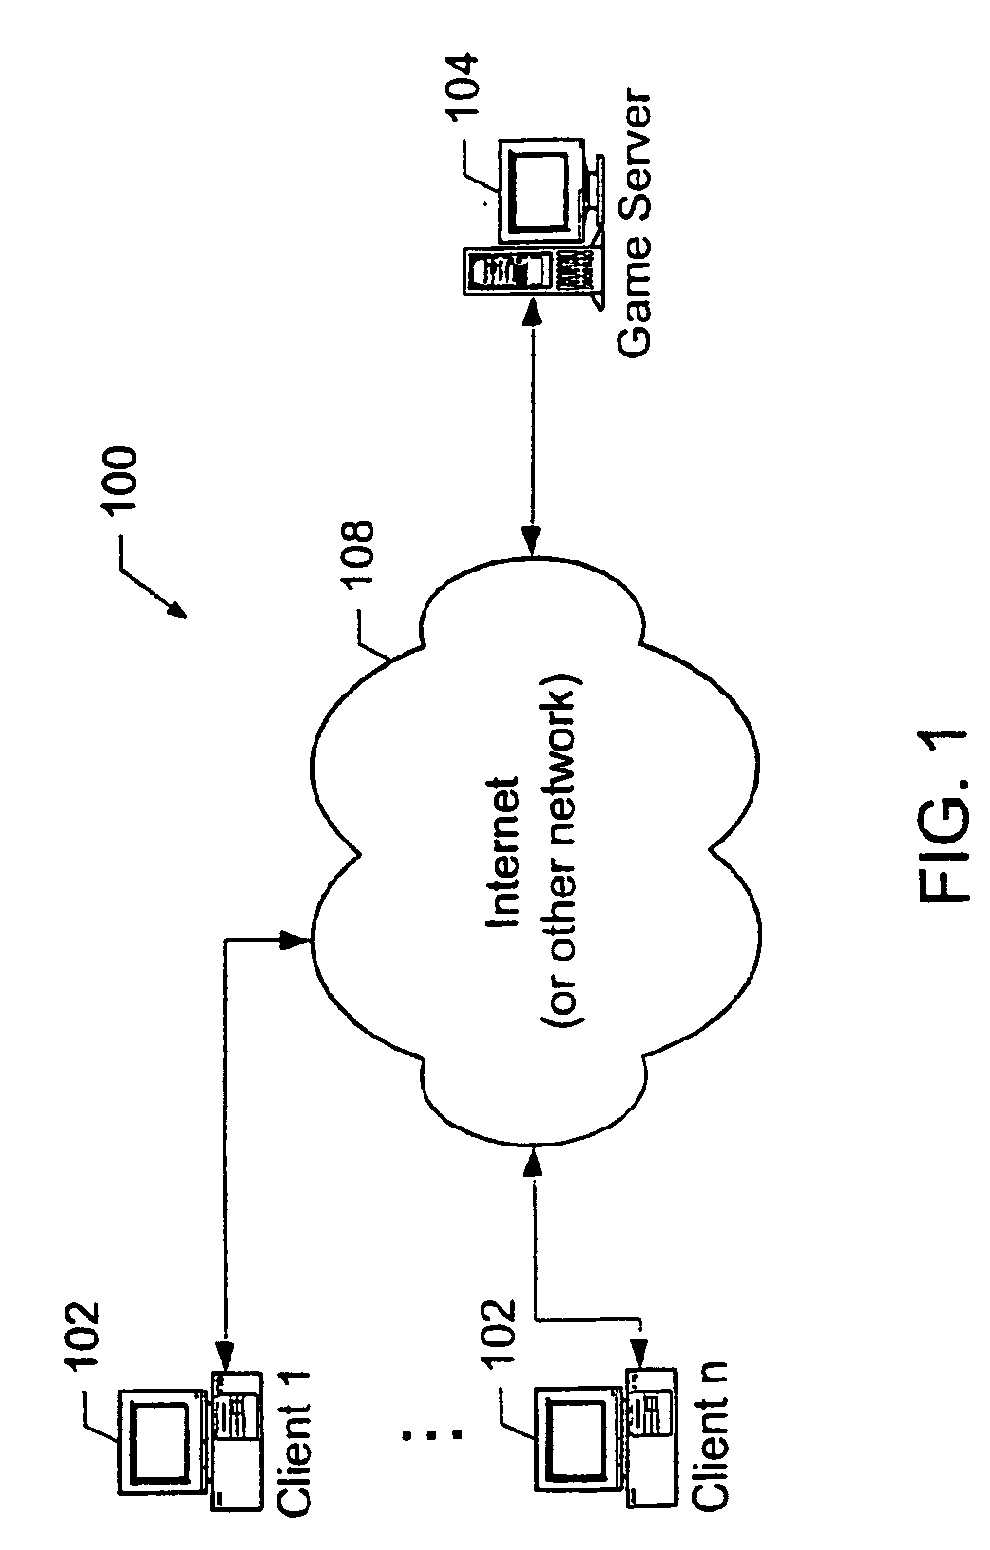 Methods and apparatus for fairly placing players in bet positions